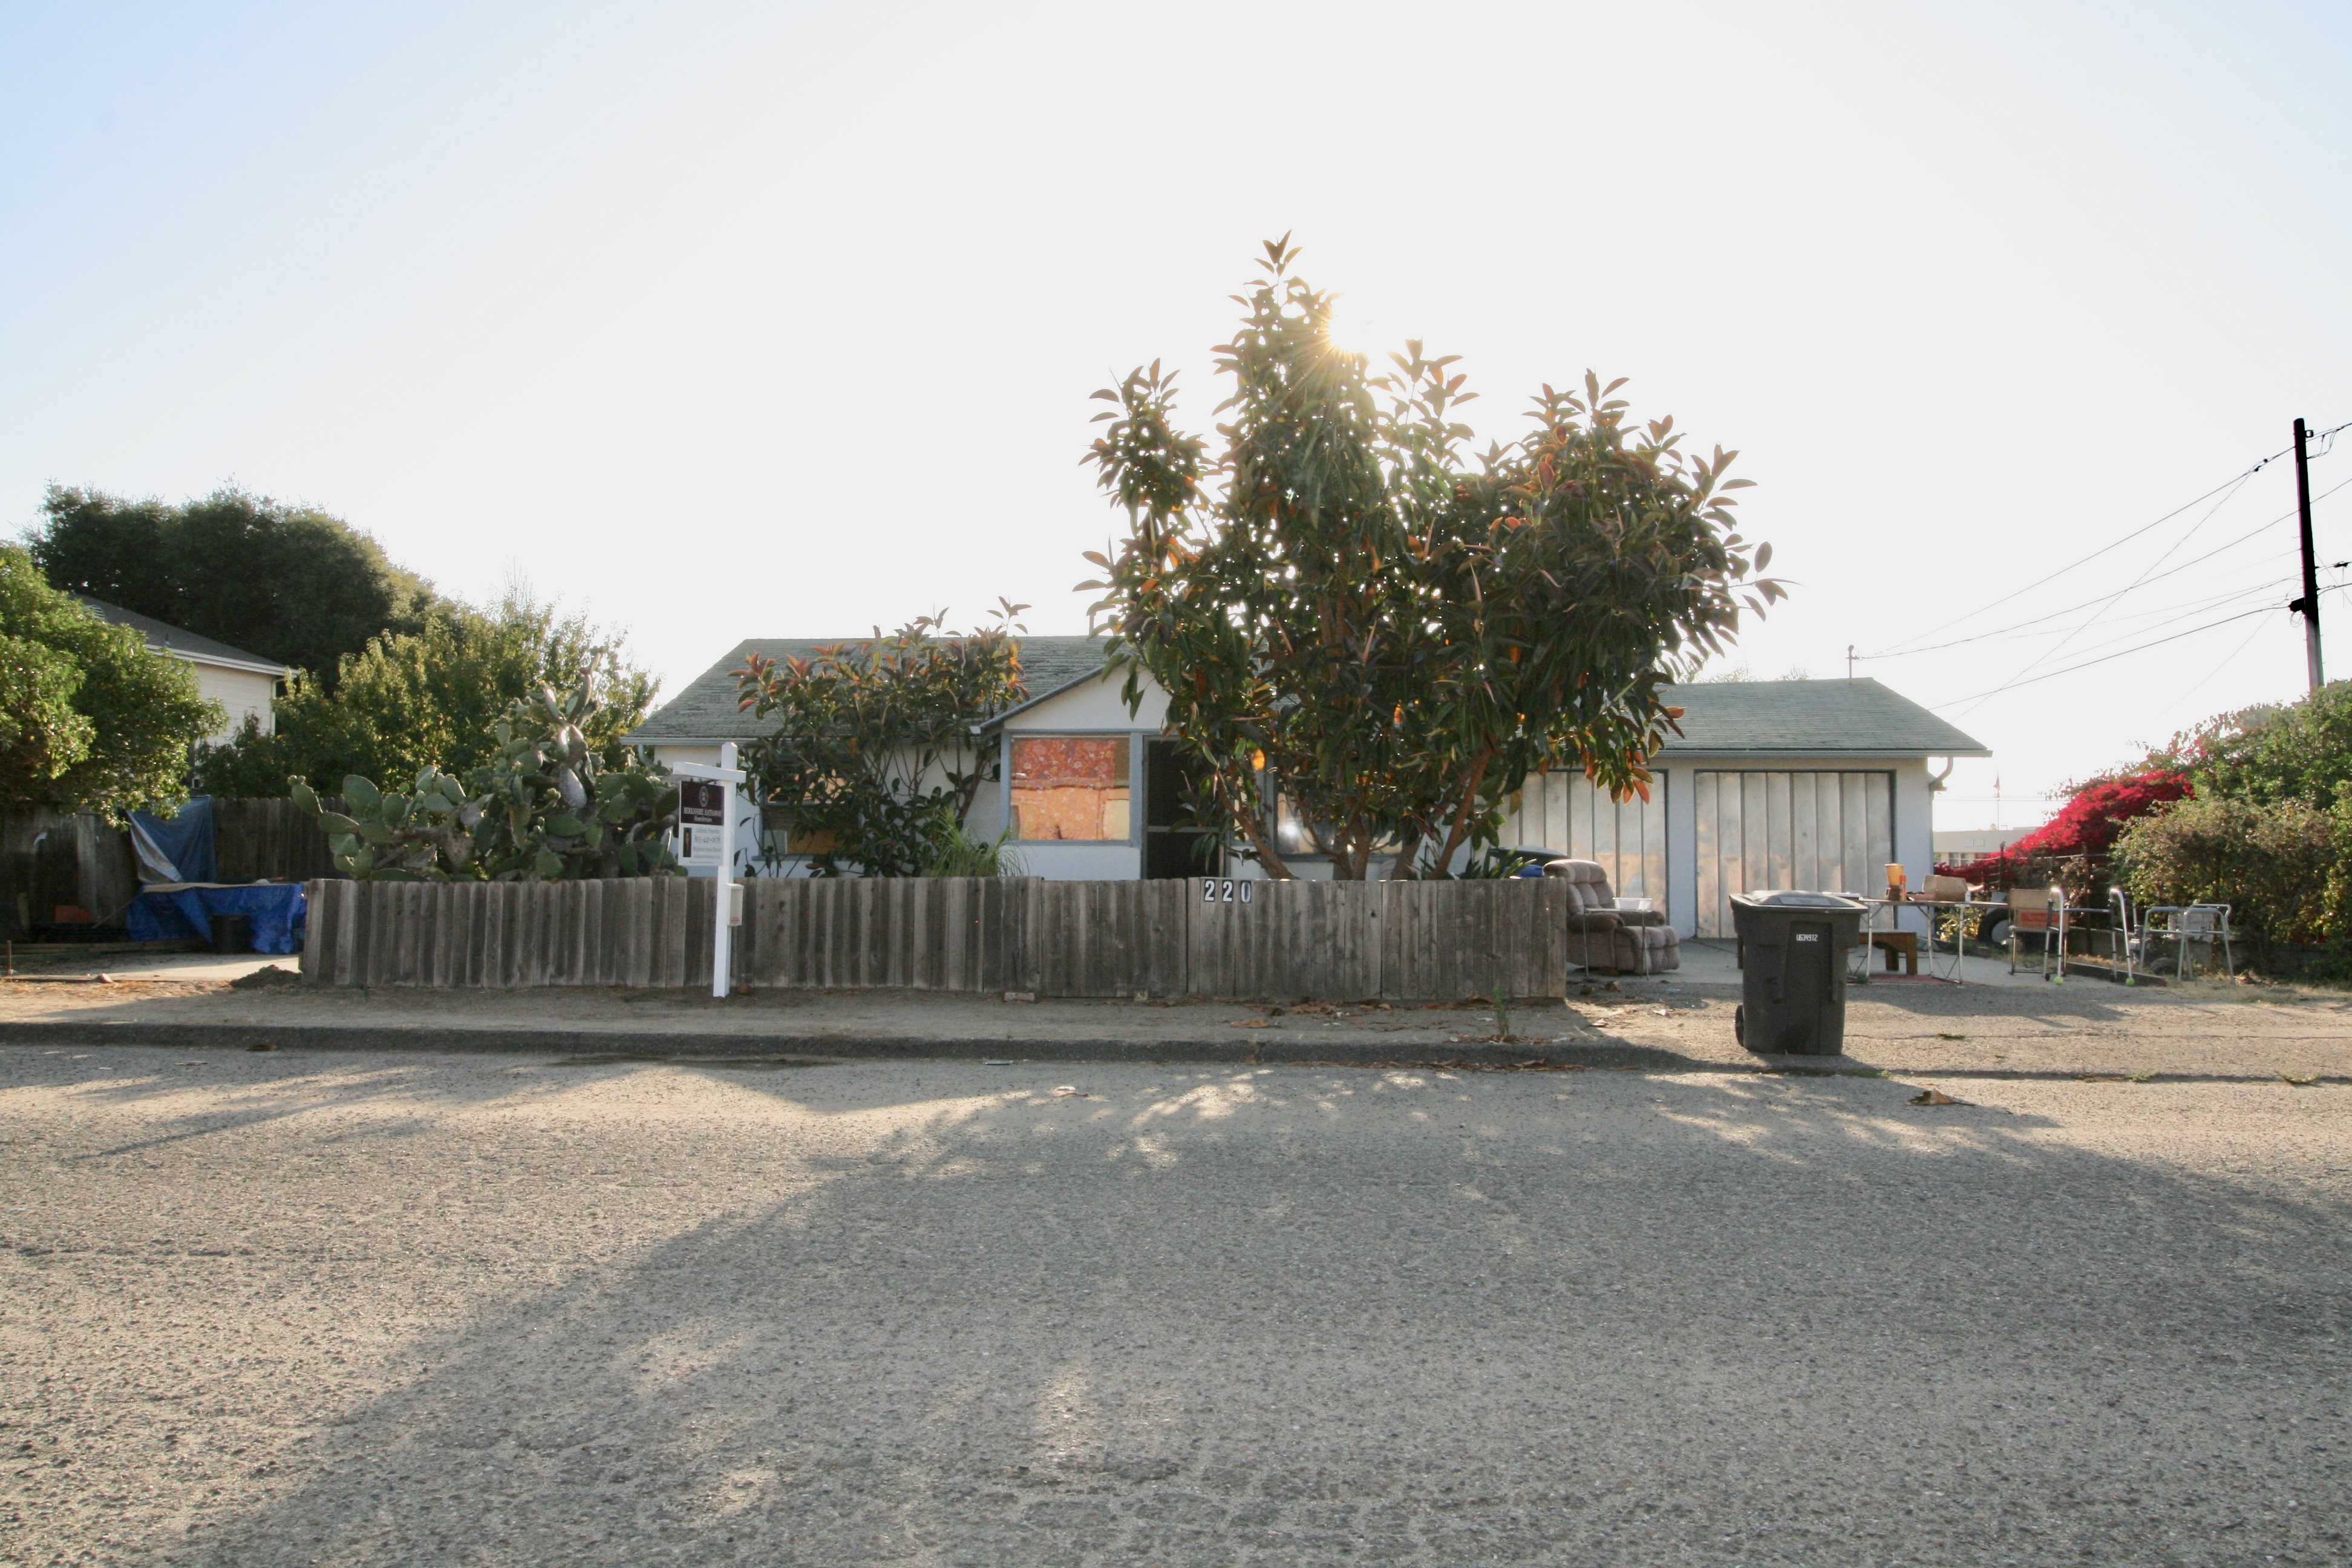 220 S. 9th Street, Grover Beach - Front of house